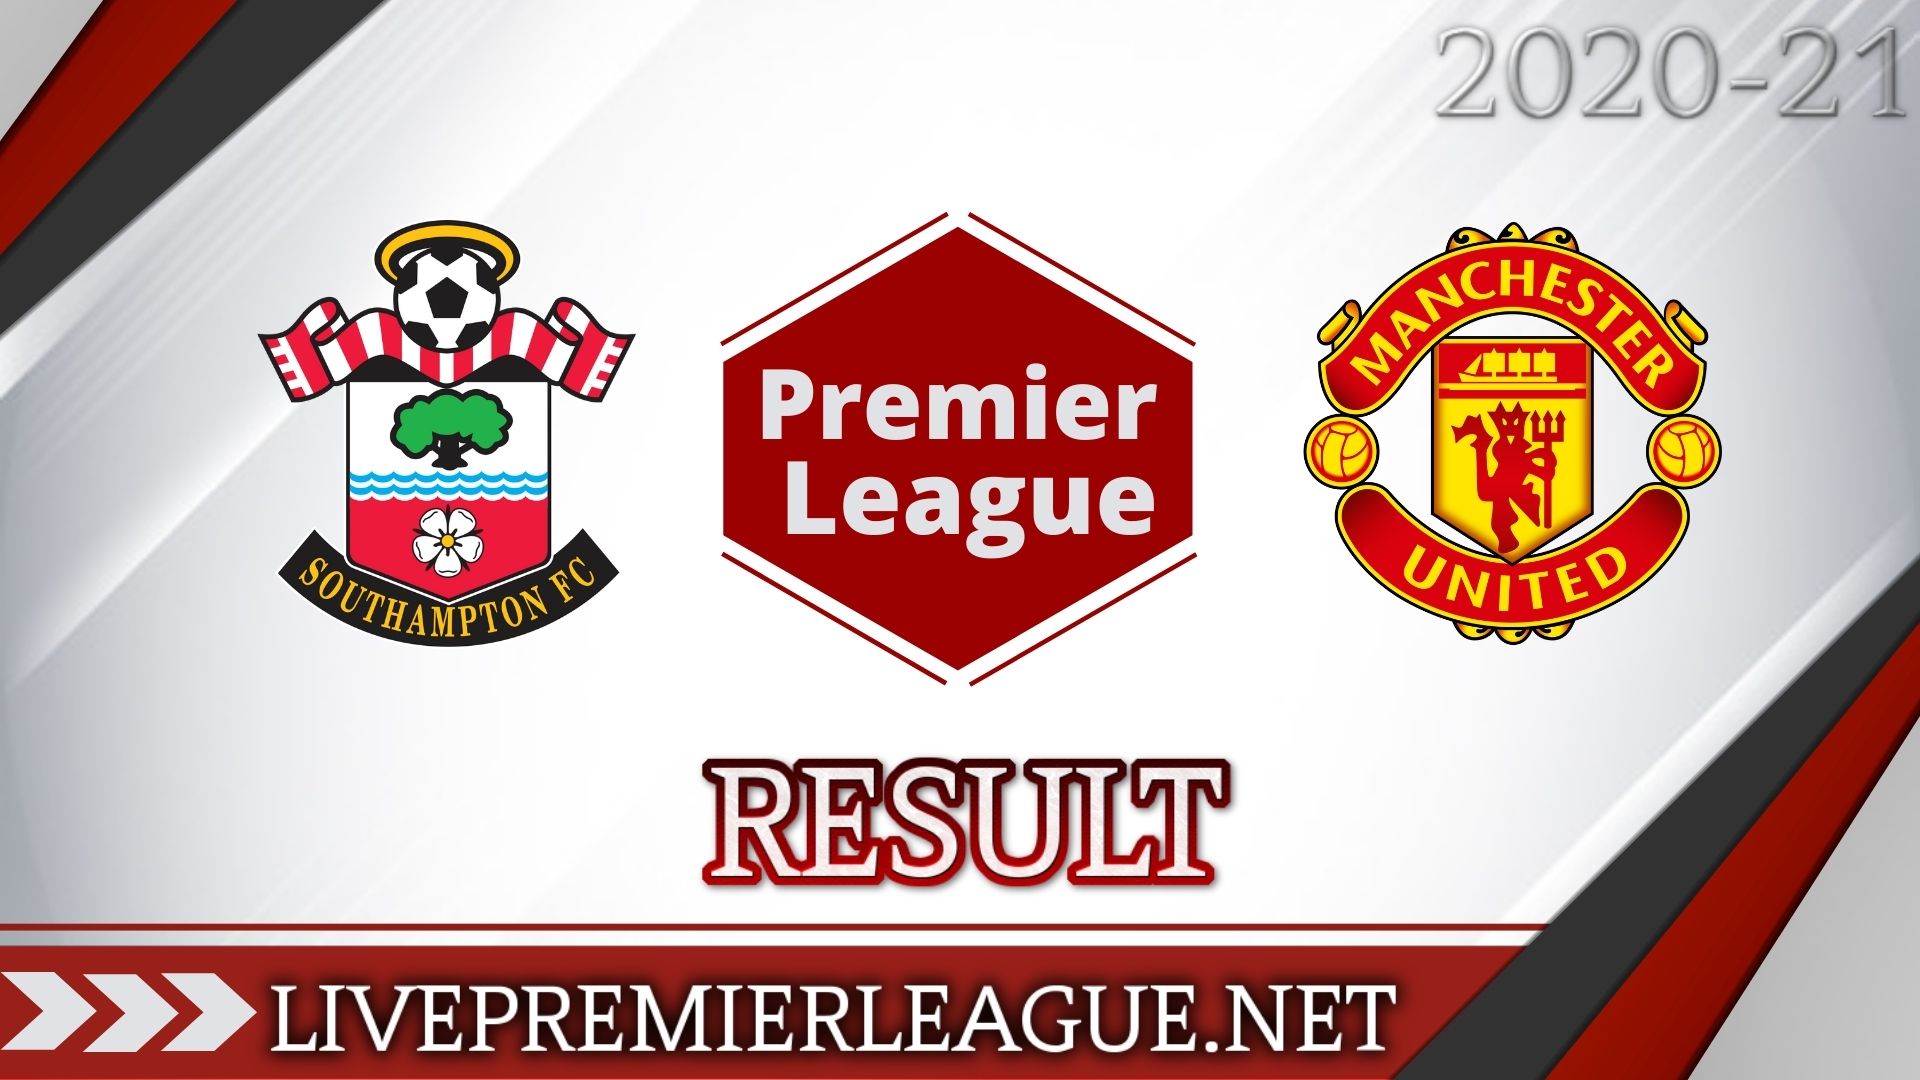 Southampton Vs Manchester United | Week 10 Result 2020